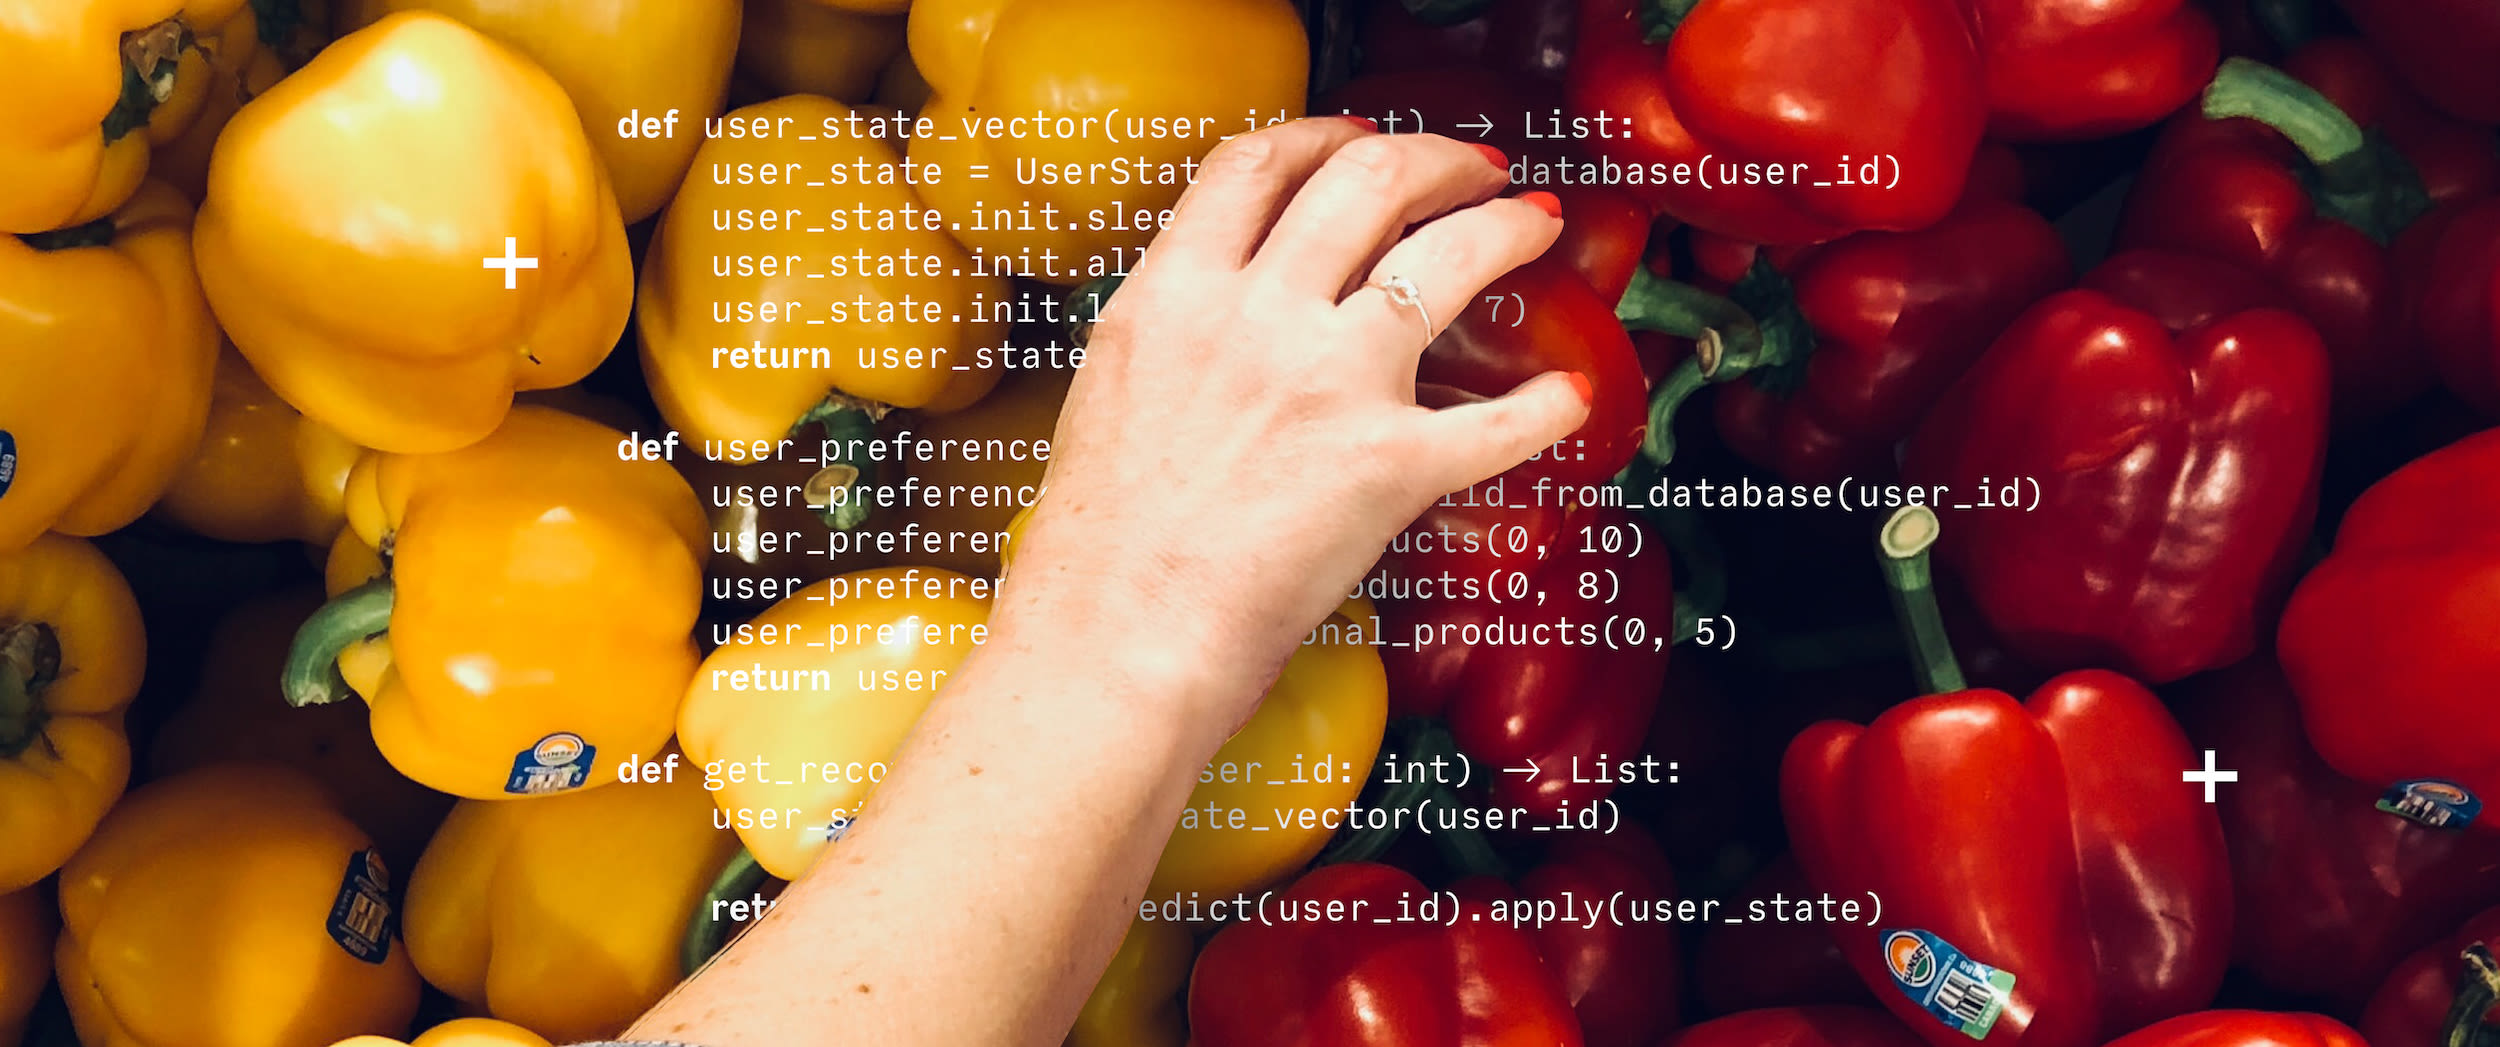 A hand picking bell peppers, with computer code in the background